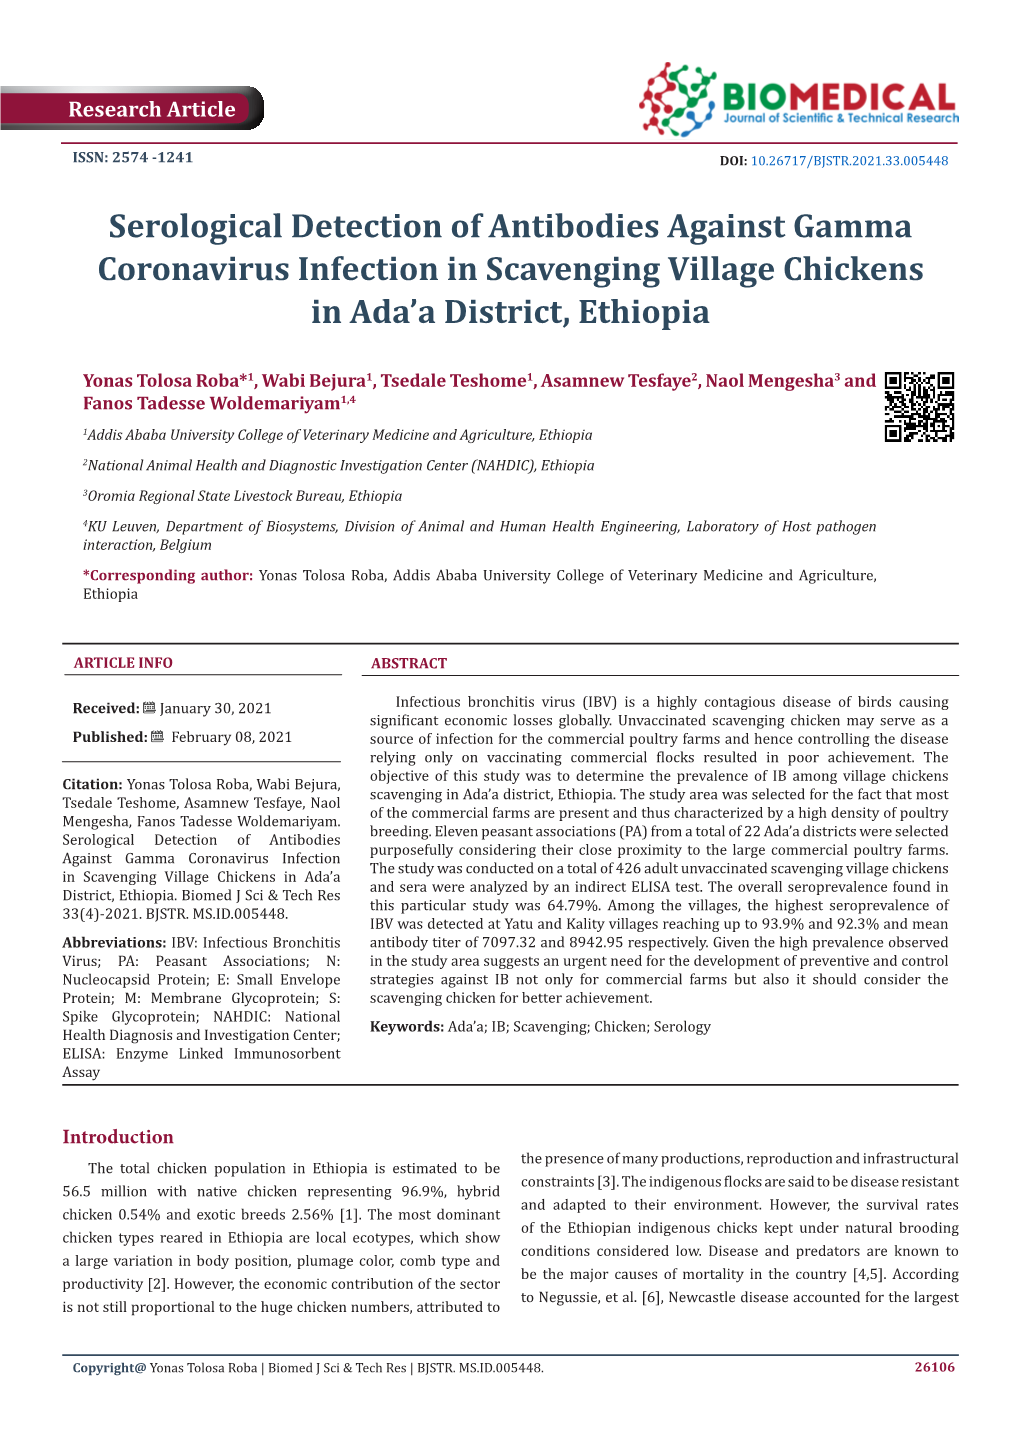 Serological Detection of Antibodies Against Gamma Coronavirus Infection in Scavenging Village Chickens in Ada’A District, Ethiopia